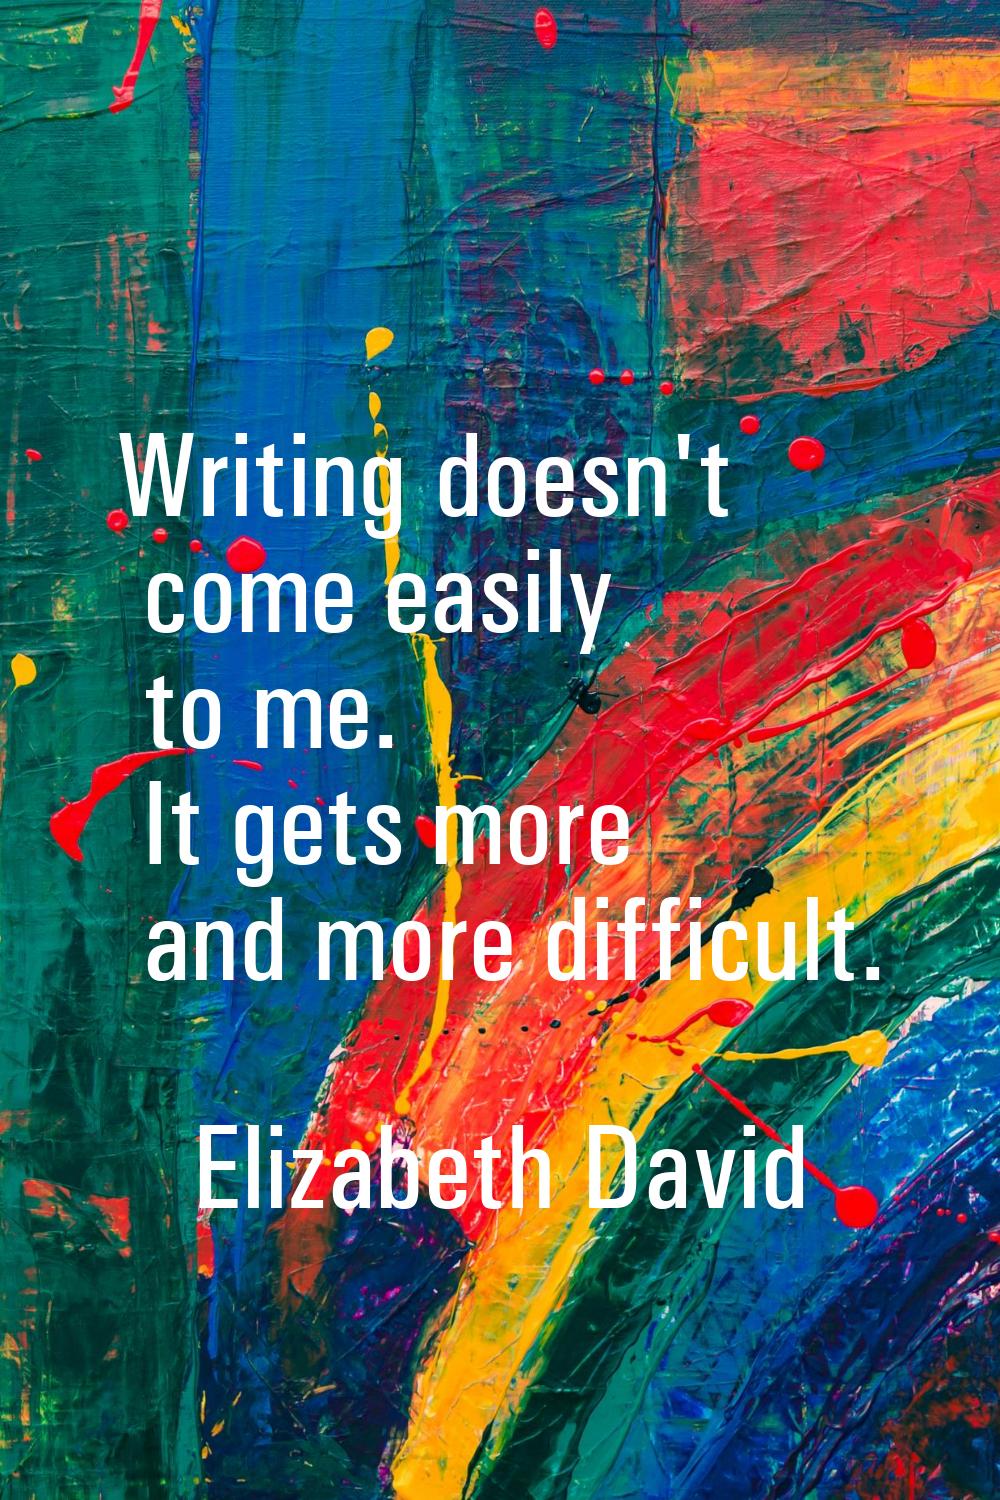 Writing doesn't come easily to me. It gets more and more difficult.